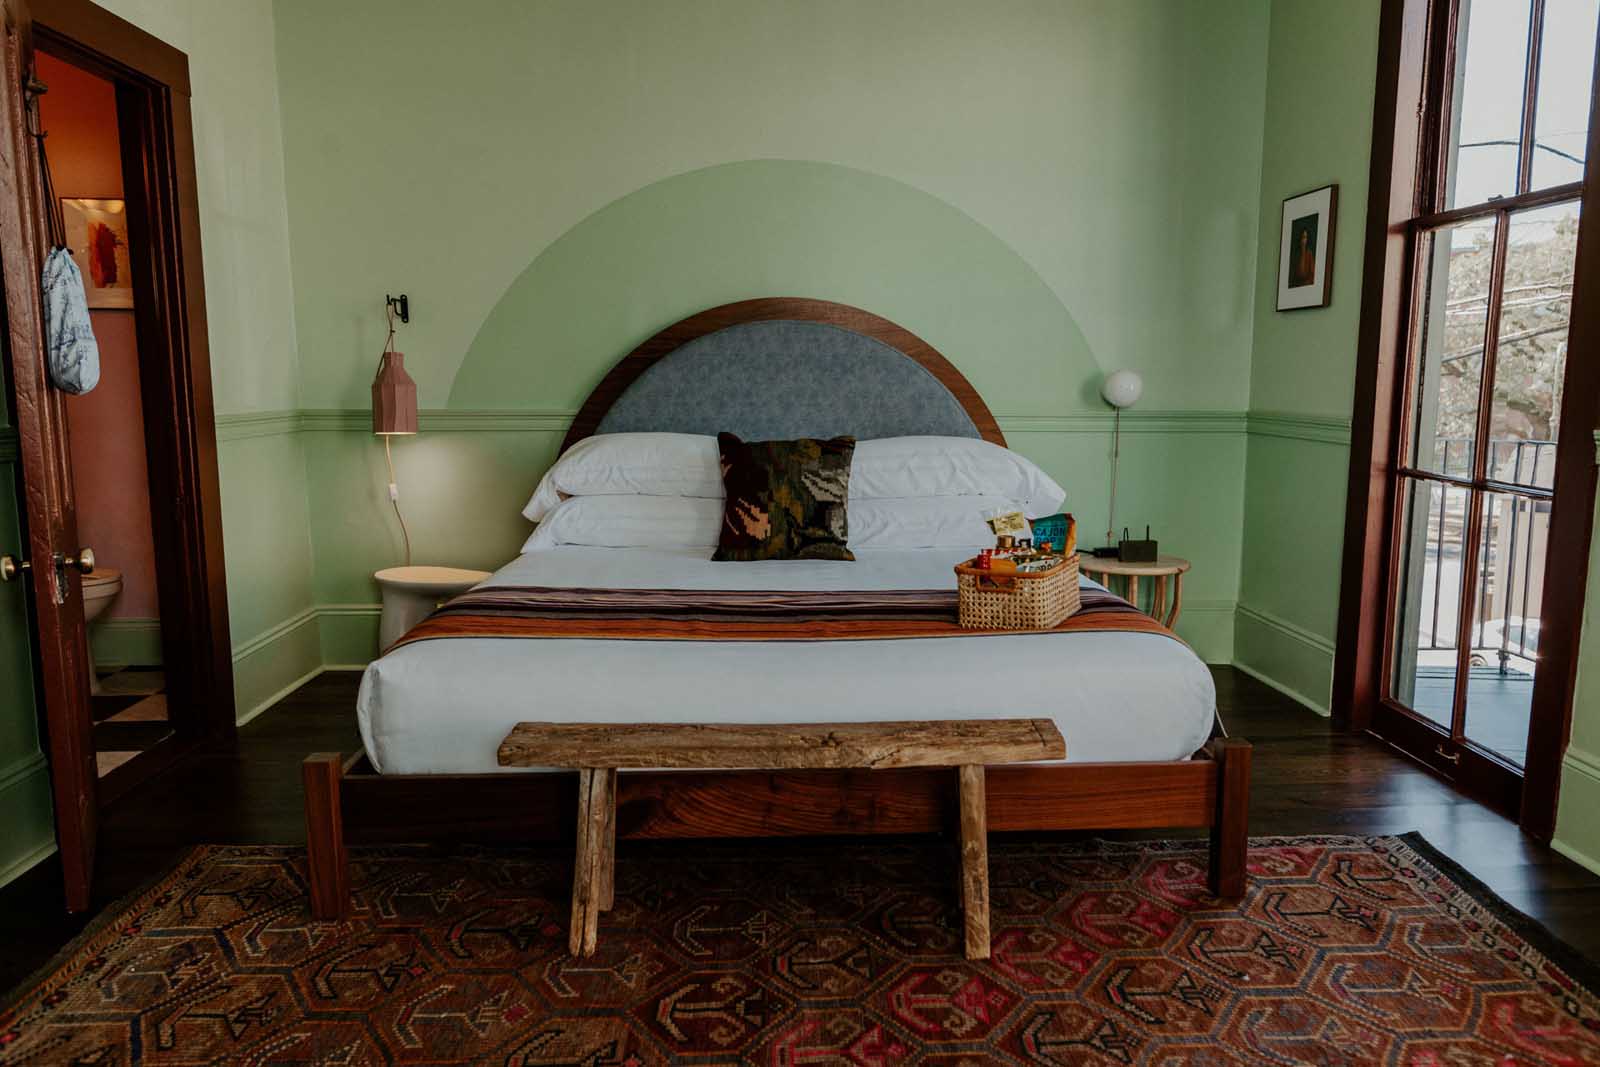 Best Boutique Hotels in NOLA The Frenchman Hotel